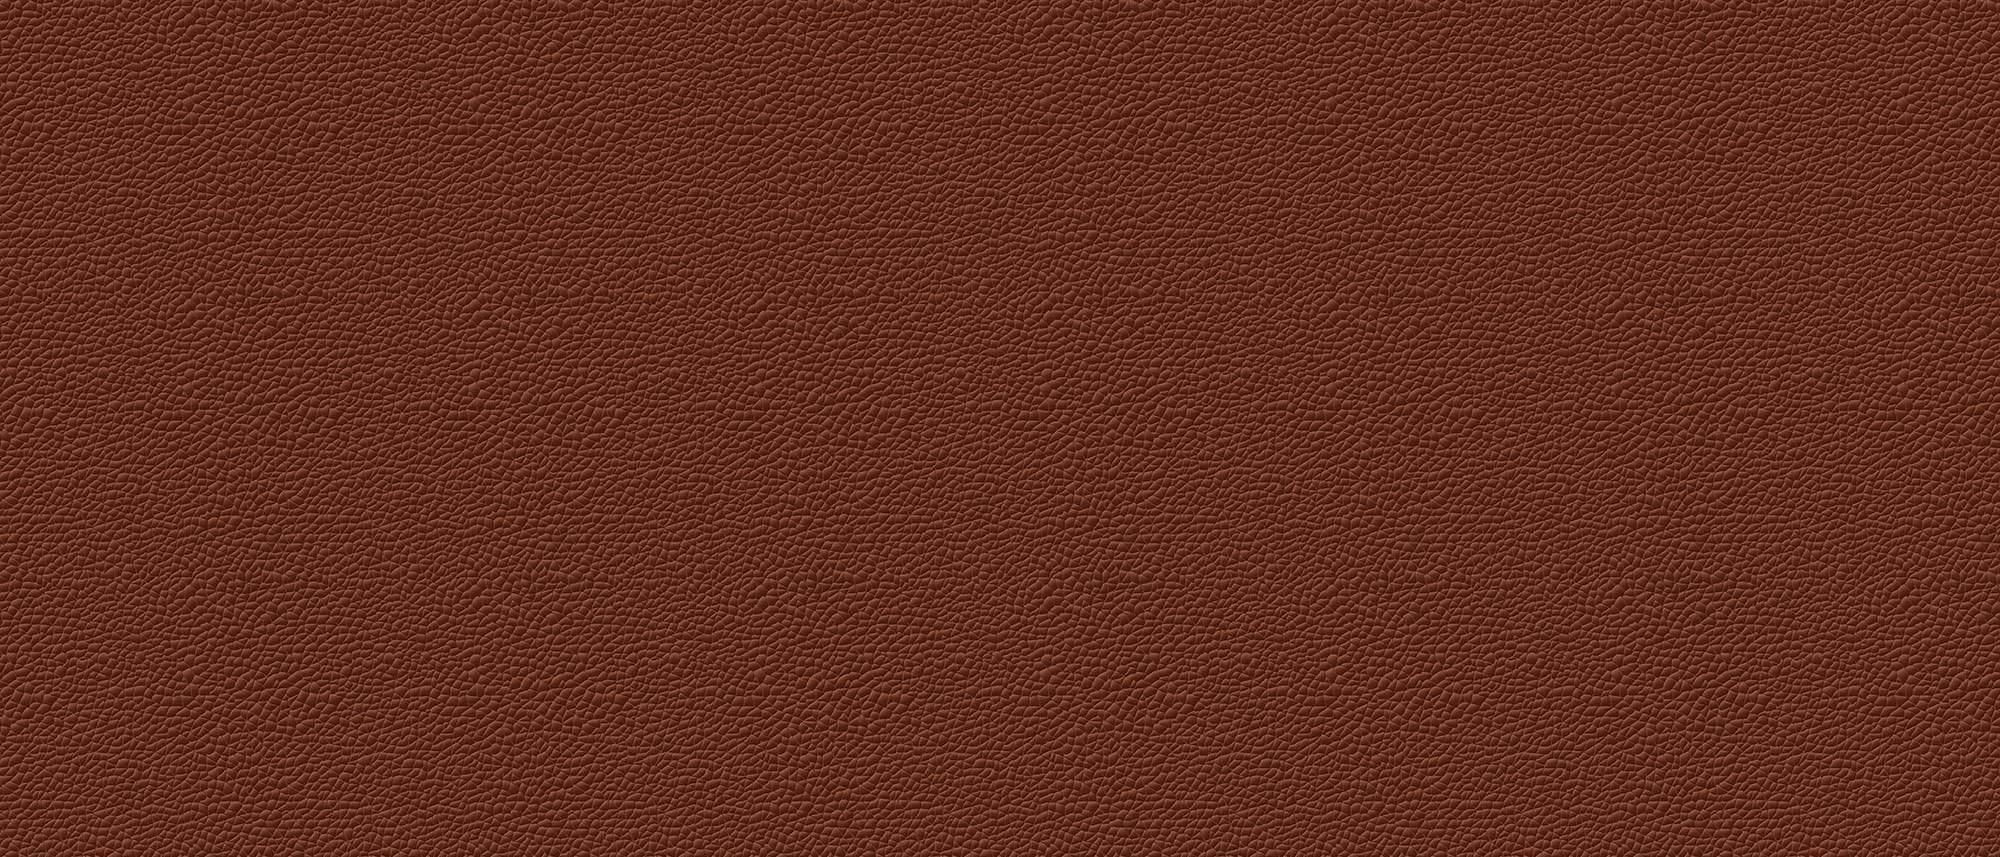 Seamless leather texture brown background pattern